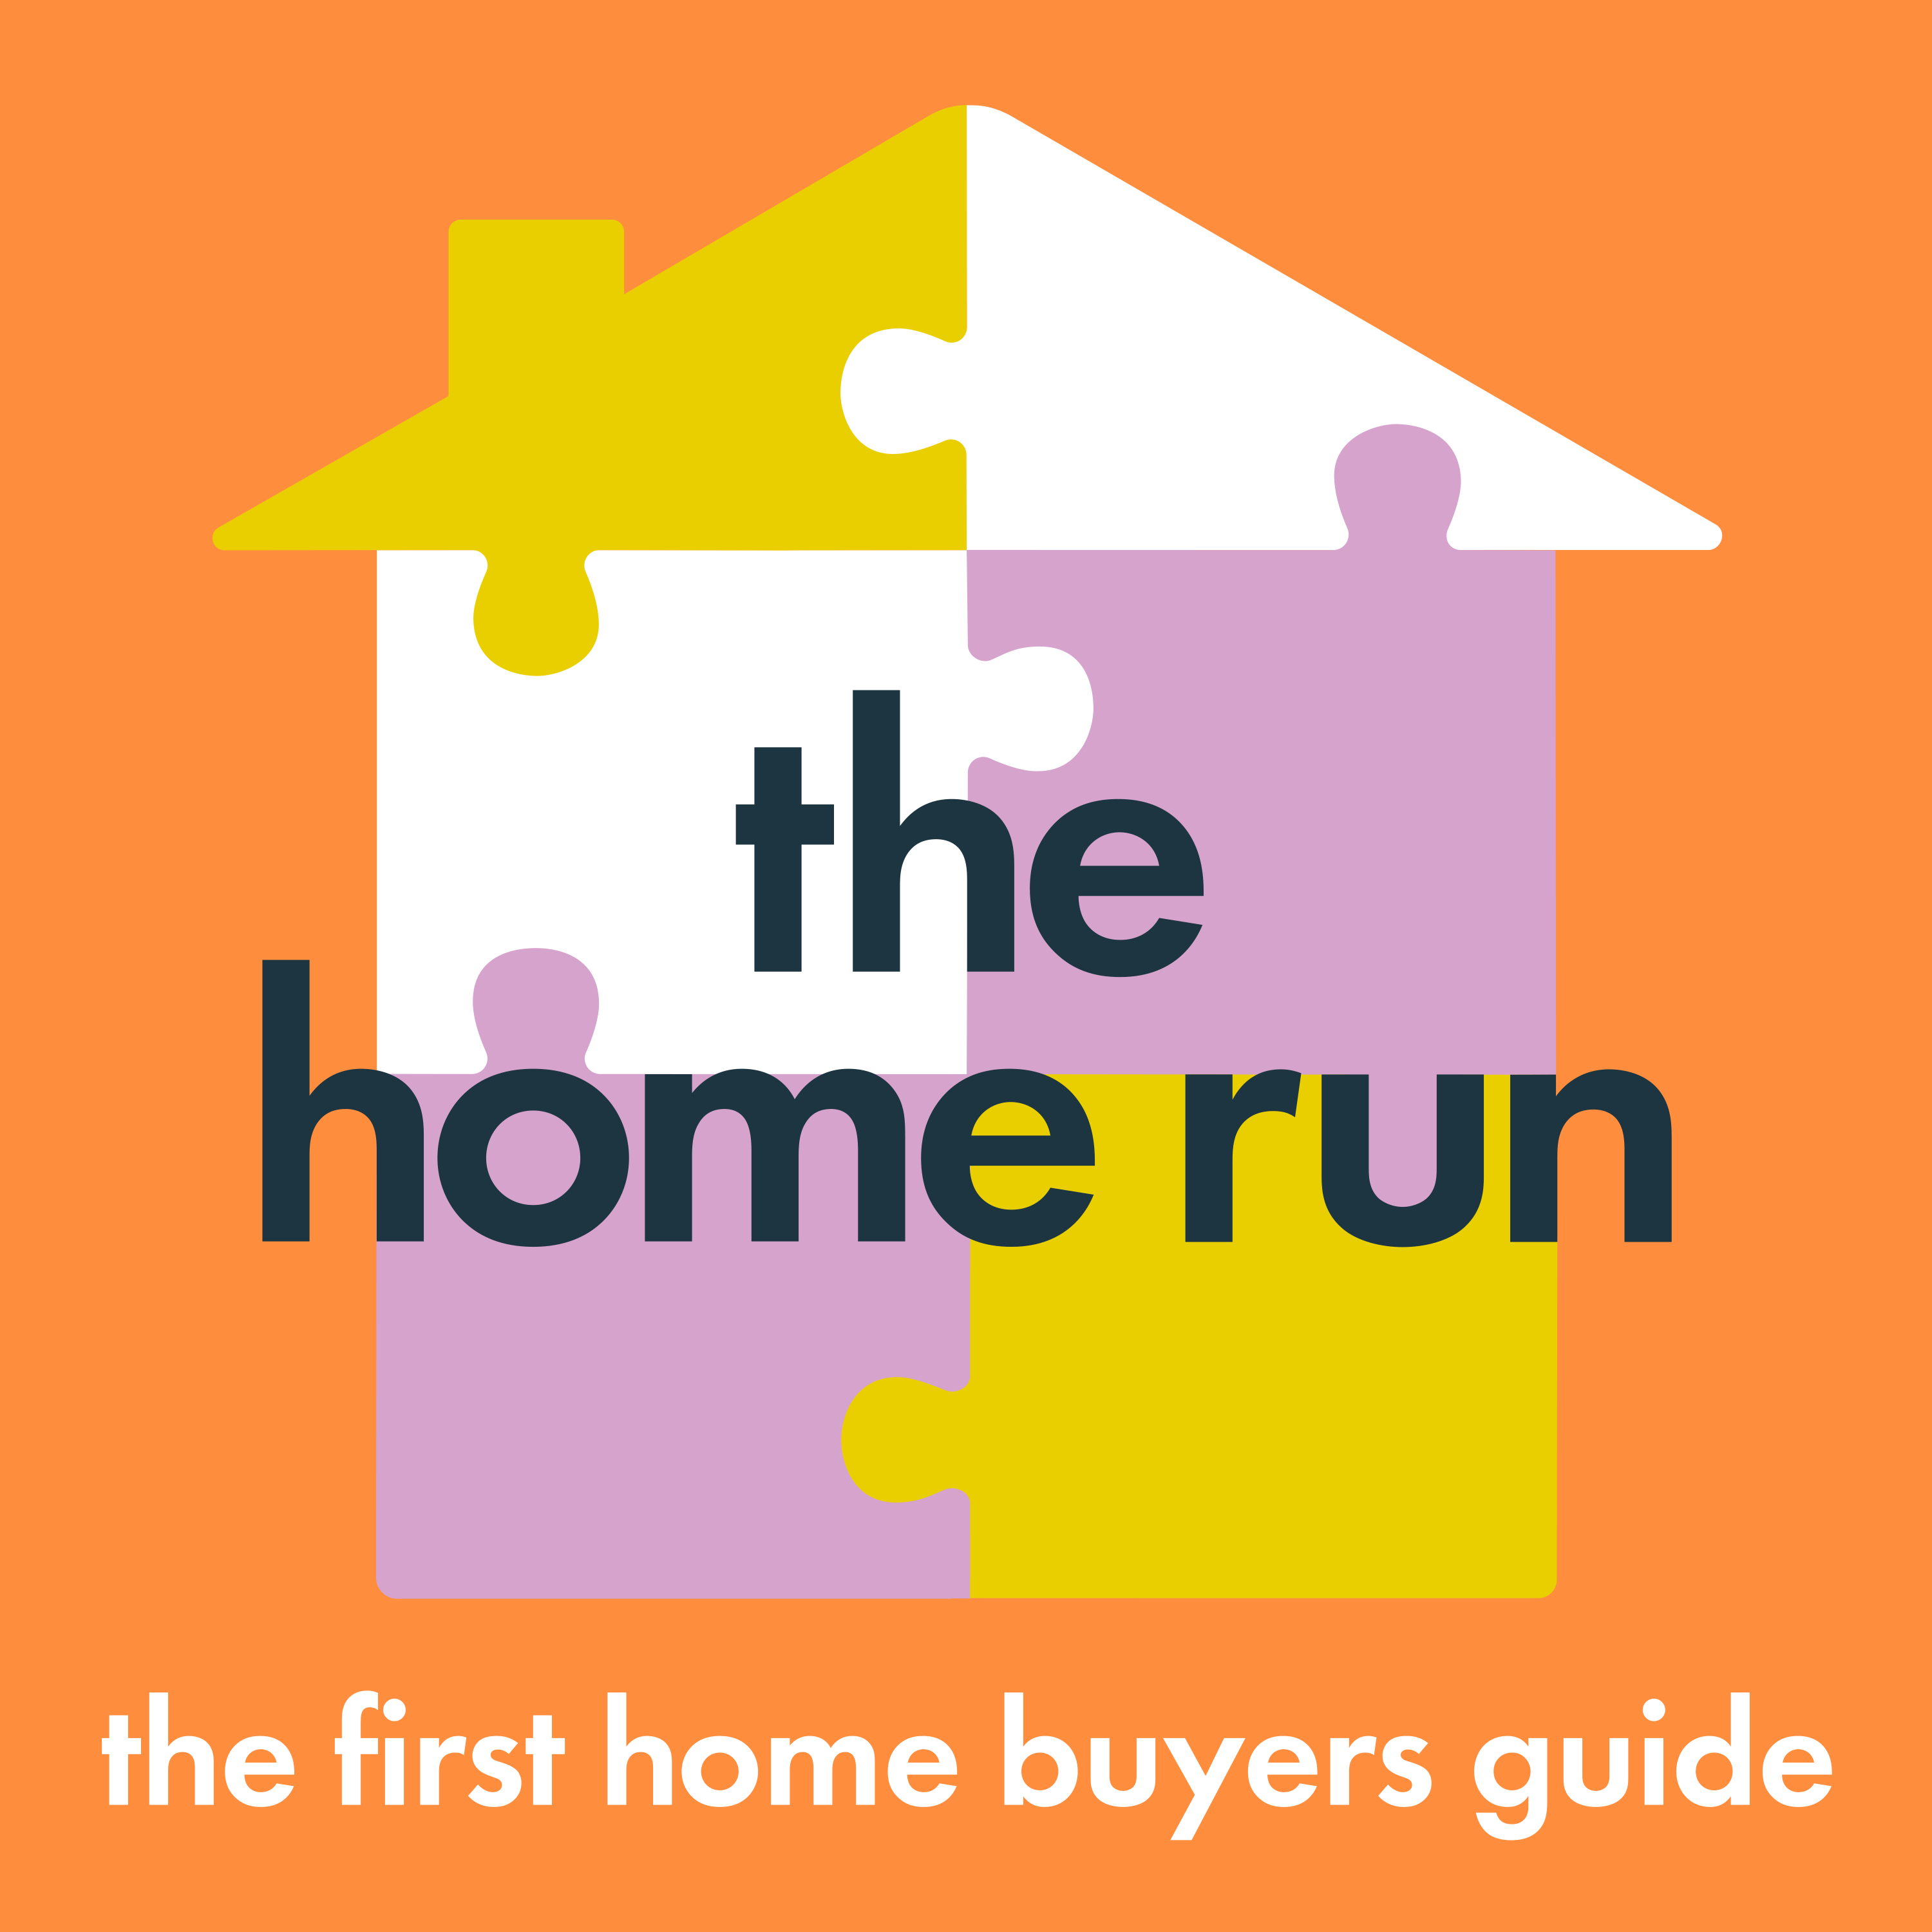 Answering your questions about the home-buying process